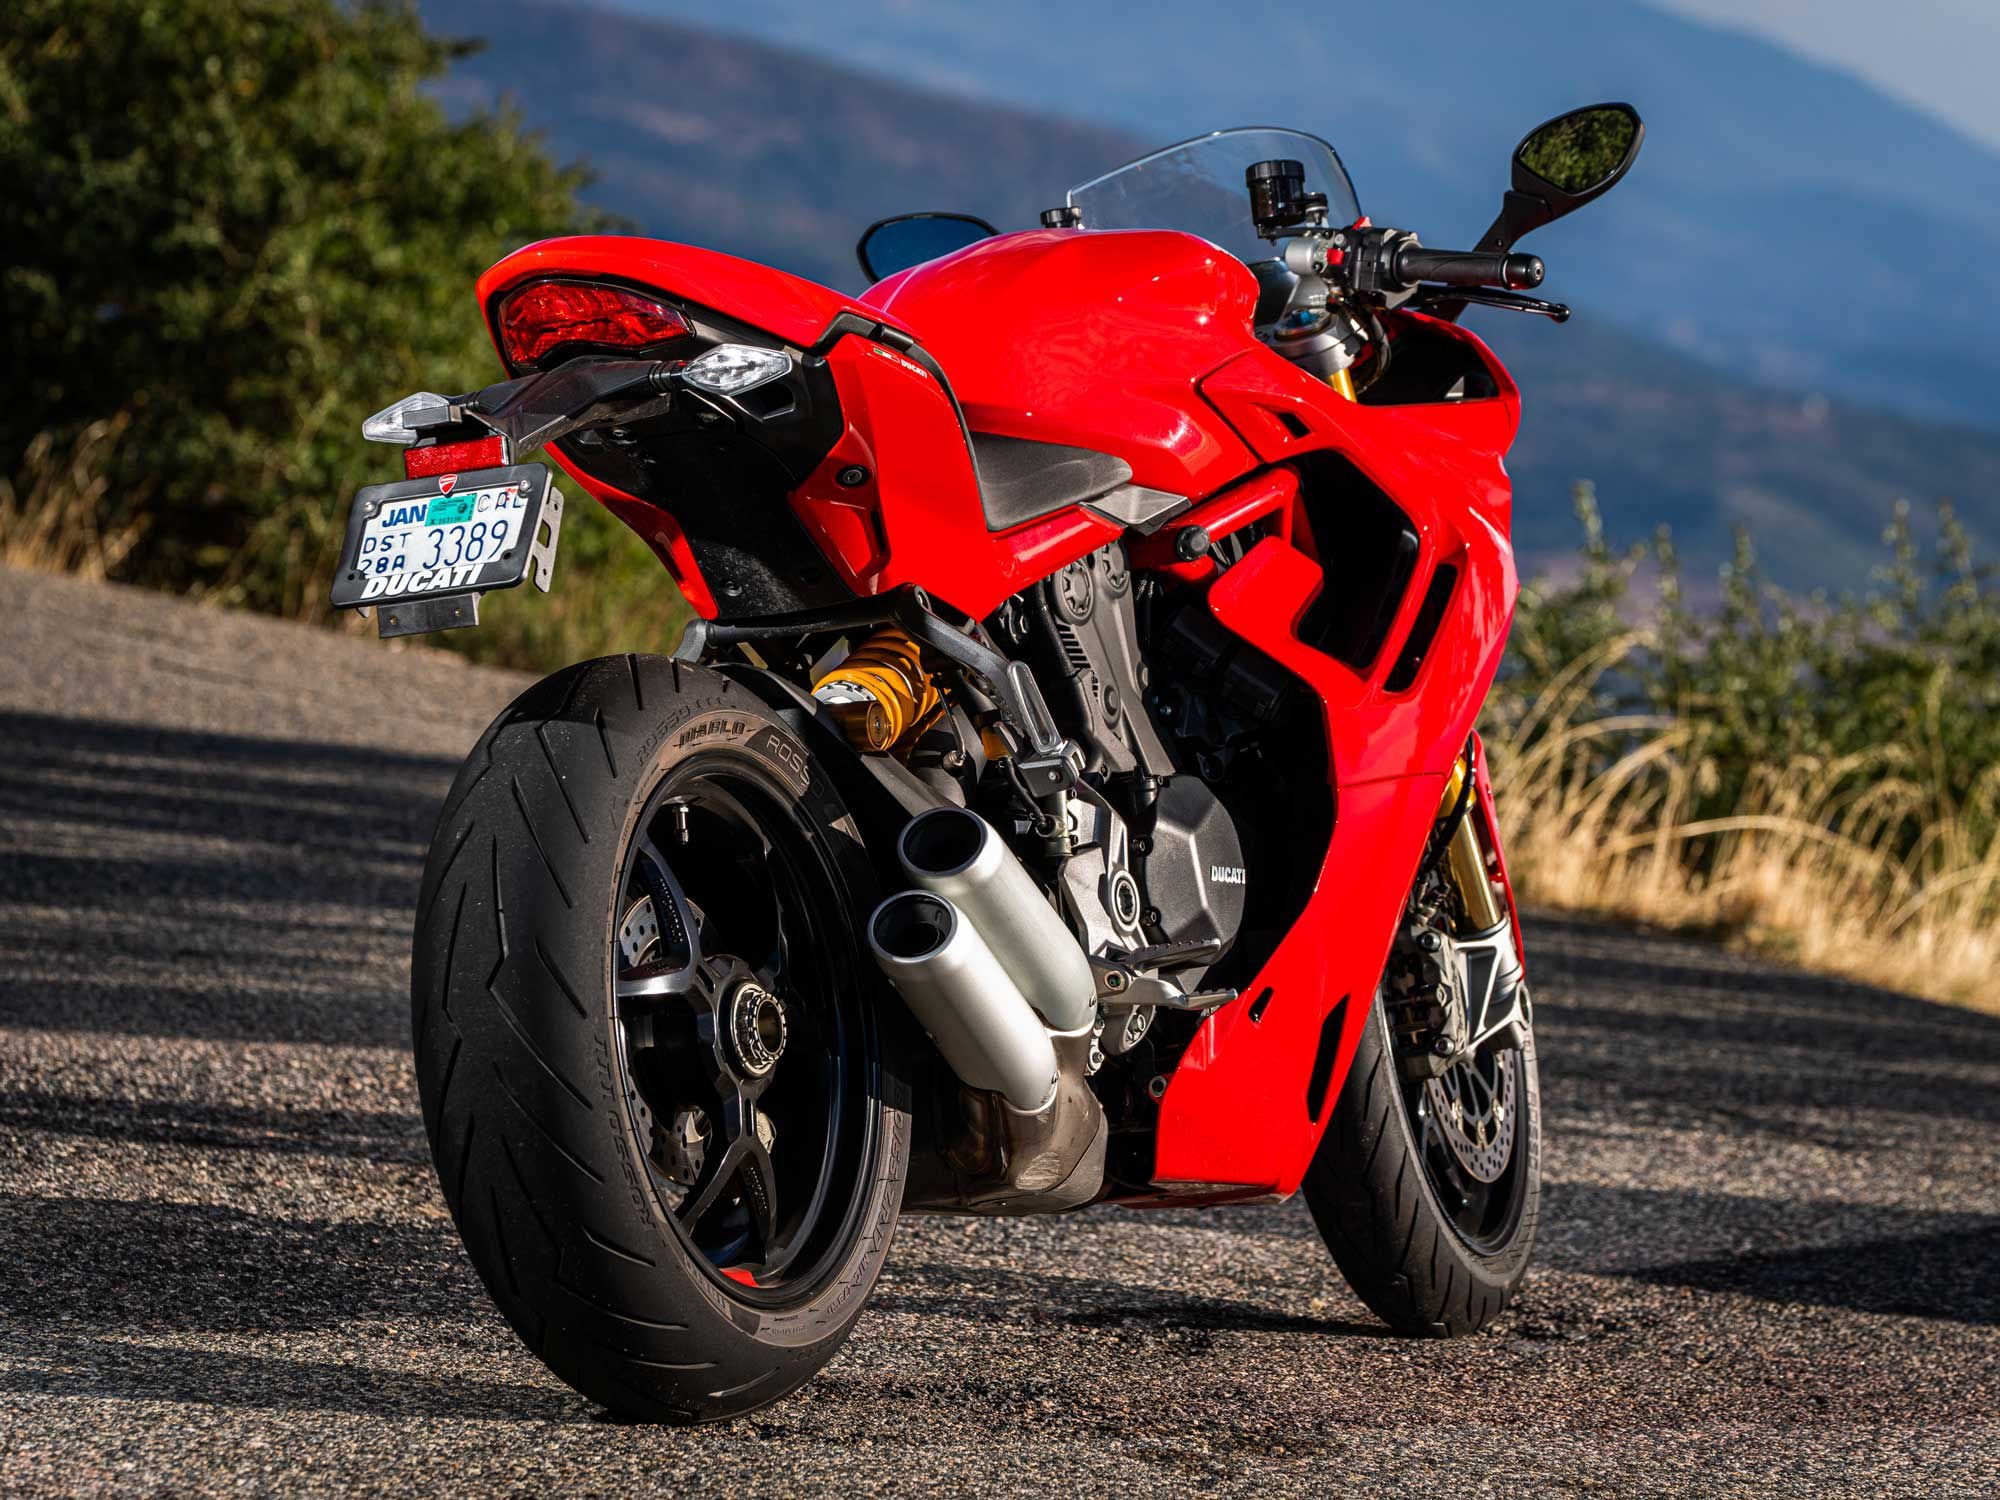 The SuperSport S is certainly a looker when viewed from any angle.